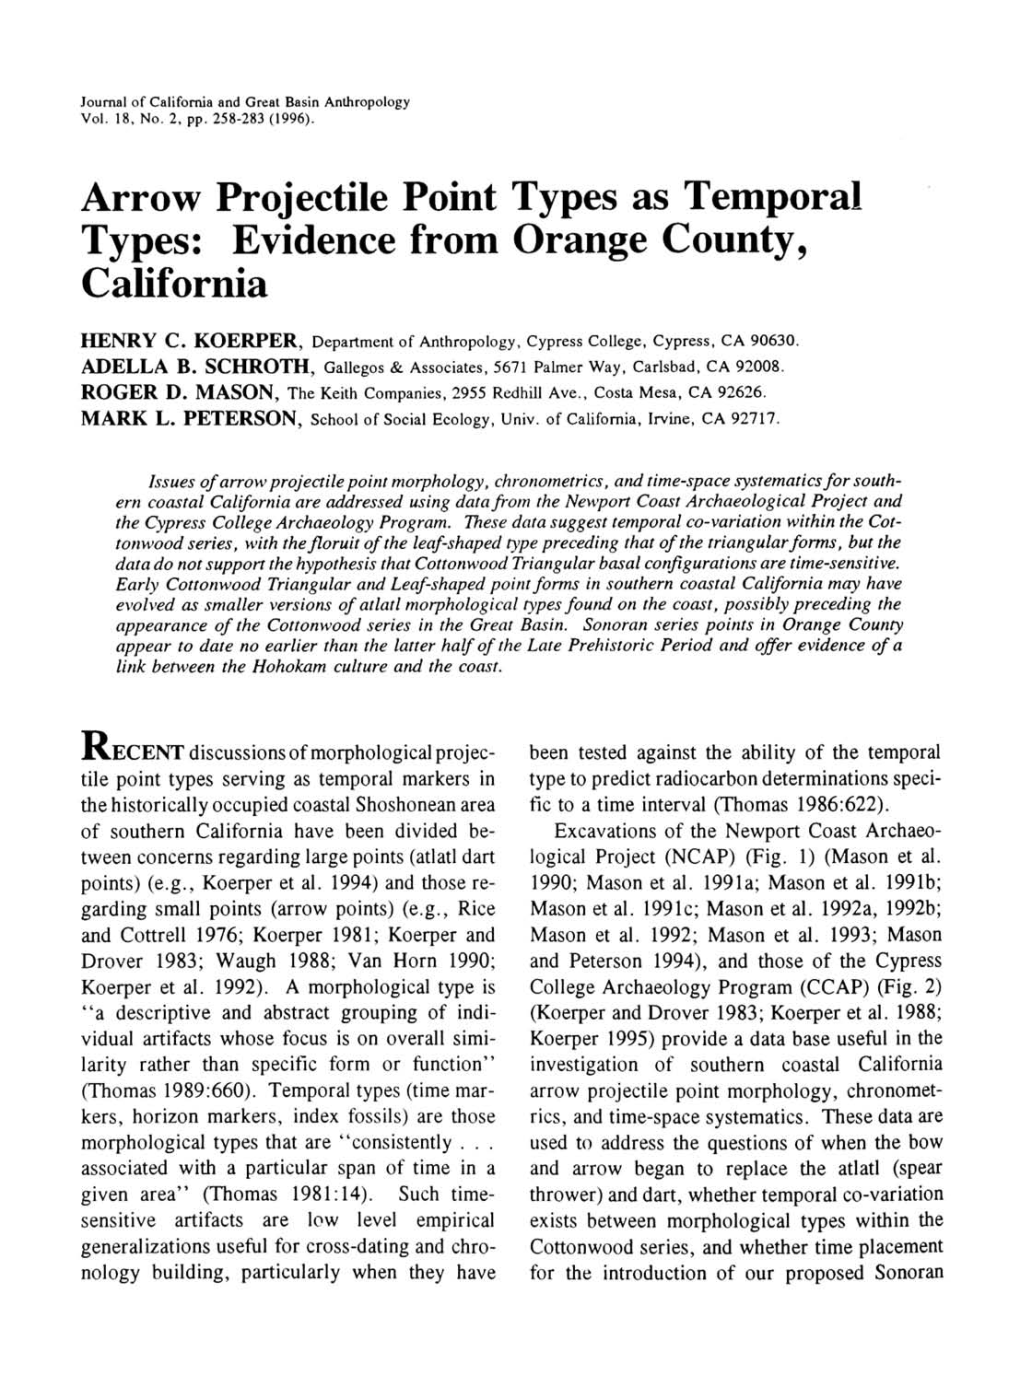 Arrow Projectile Point Types As Temporal Types: Evidence from Orange County, California